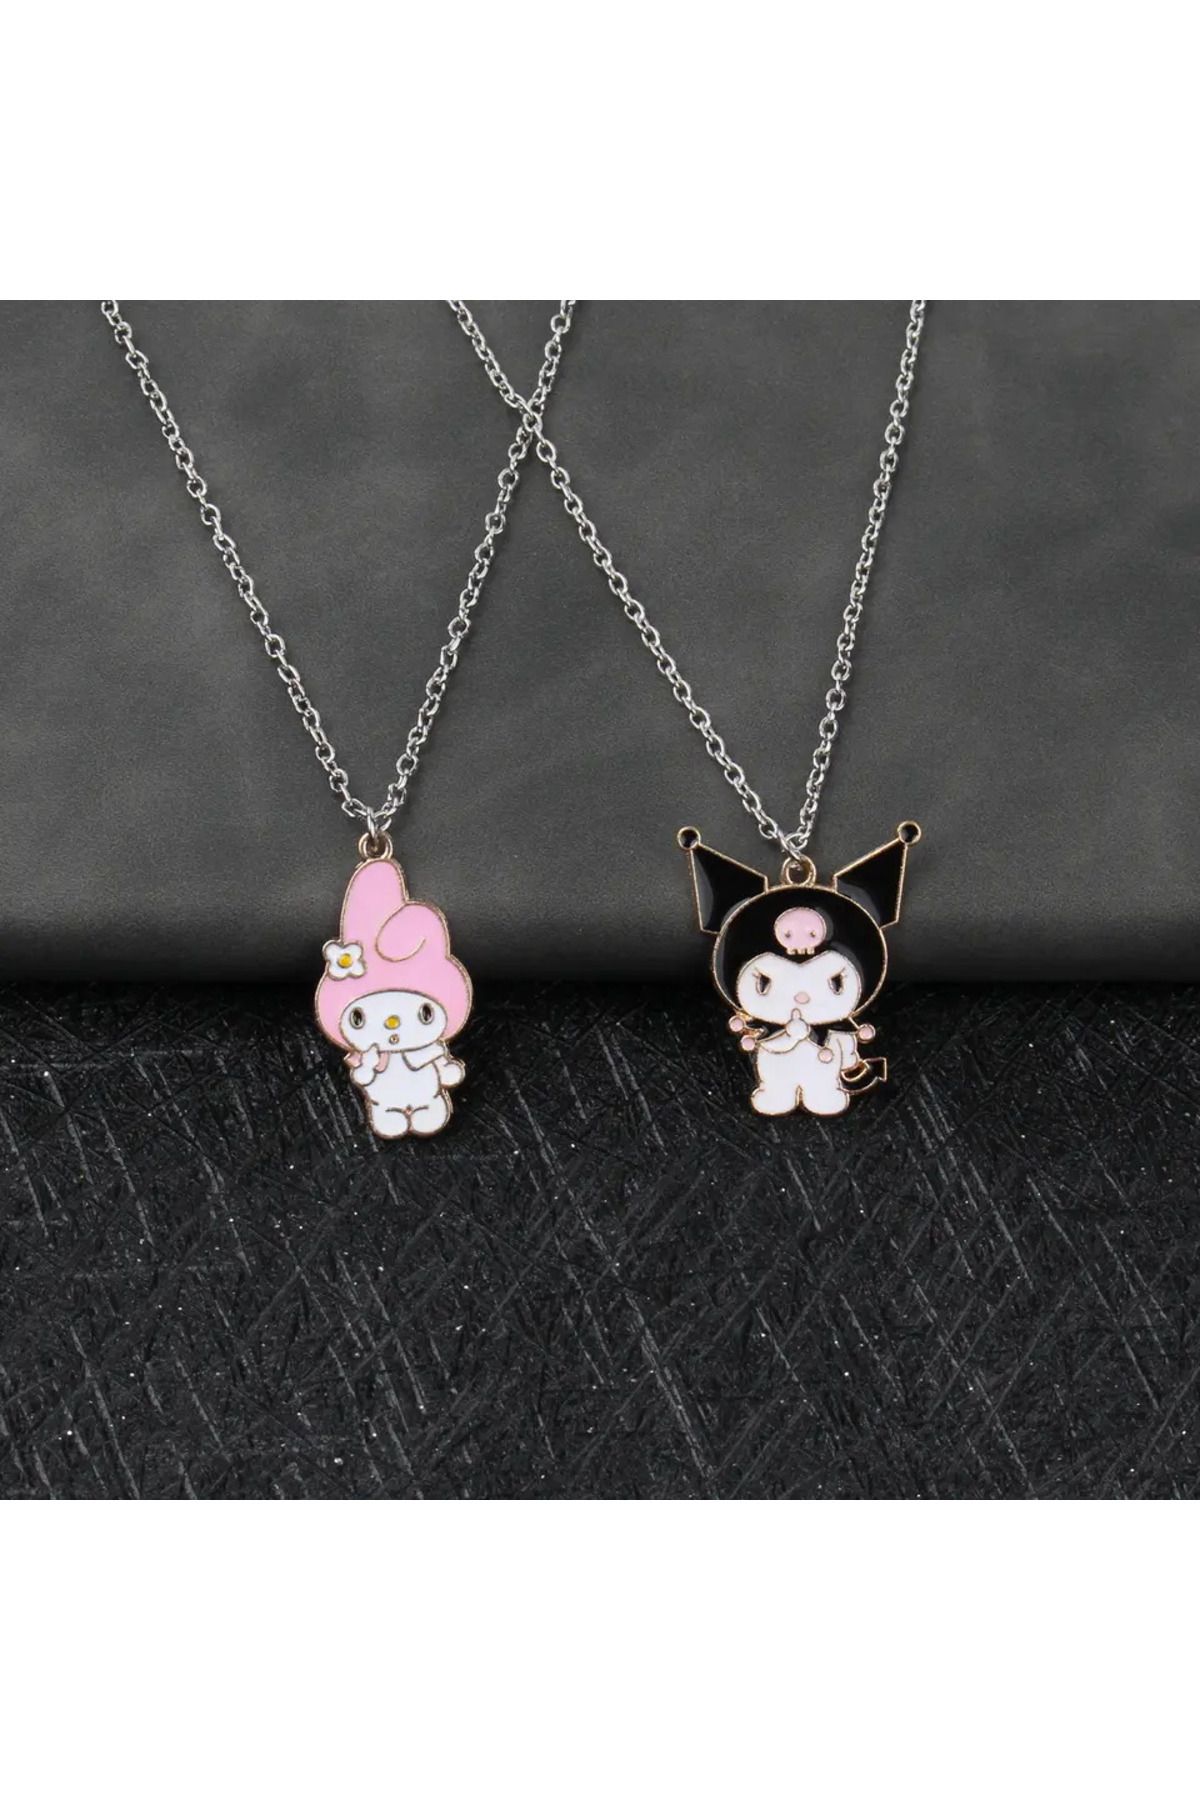 İYİ MODA 2 Pieces My Melody And Kuromi Best Friends Double Necklace Bff  Friendship Necklace - Trendyol